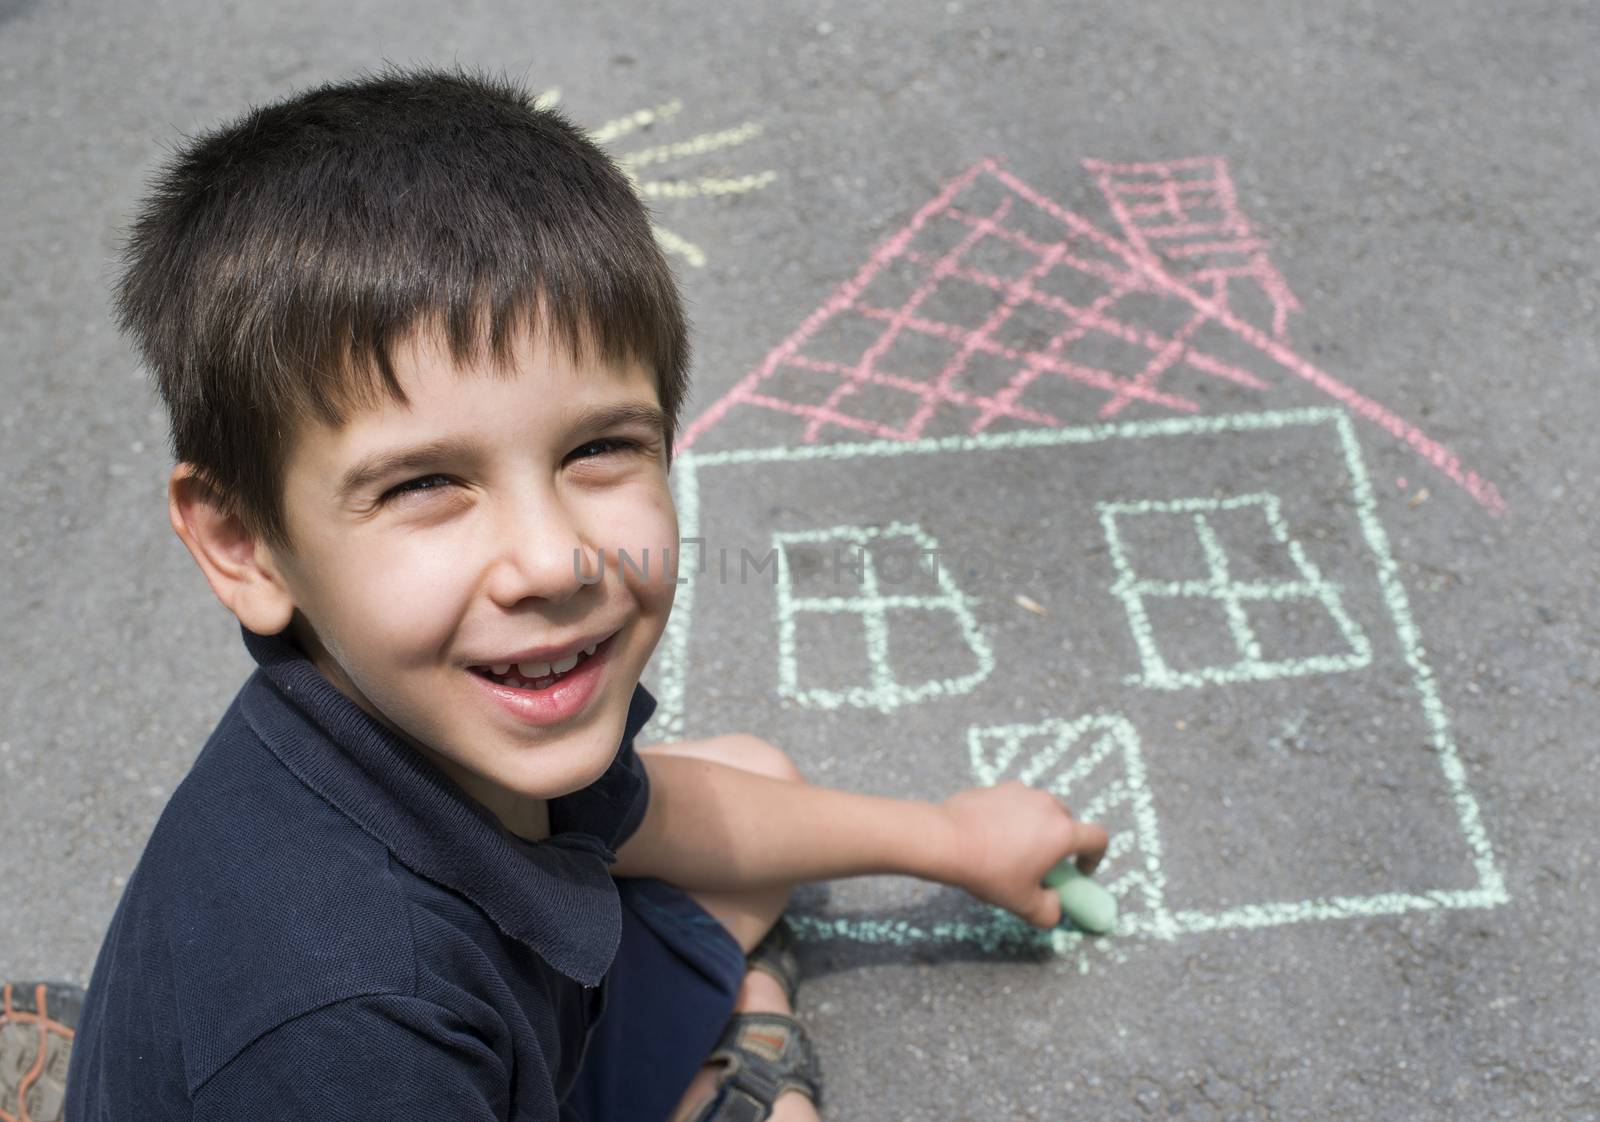 Child drawing sun and house on asphalt in a park